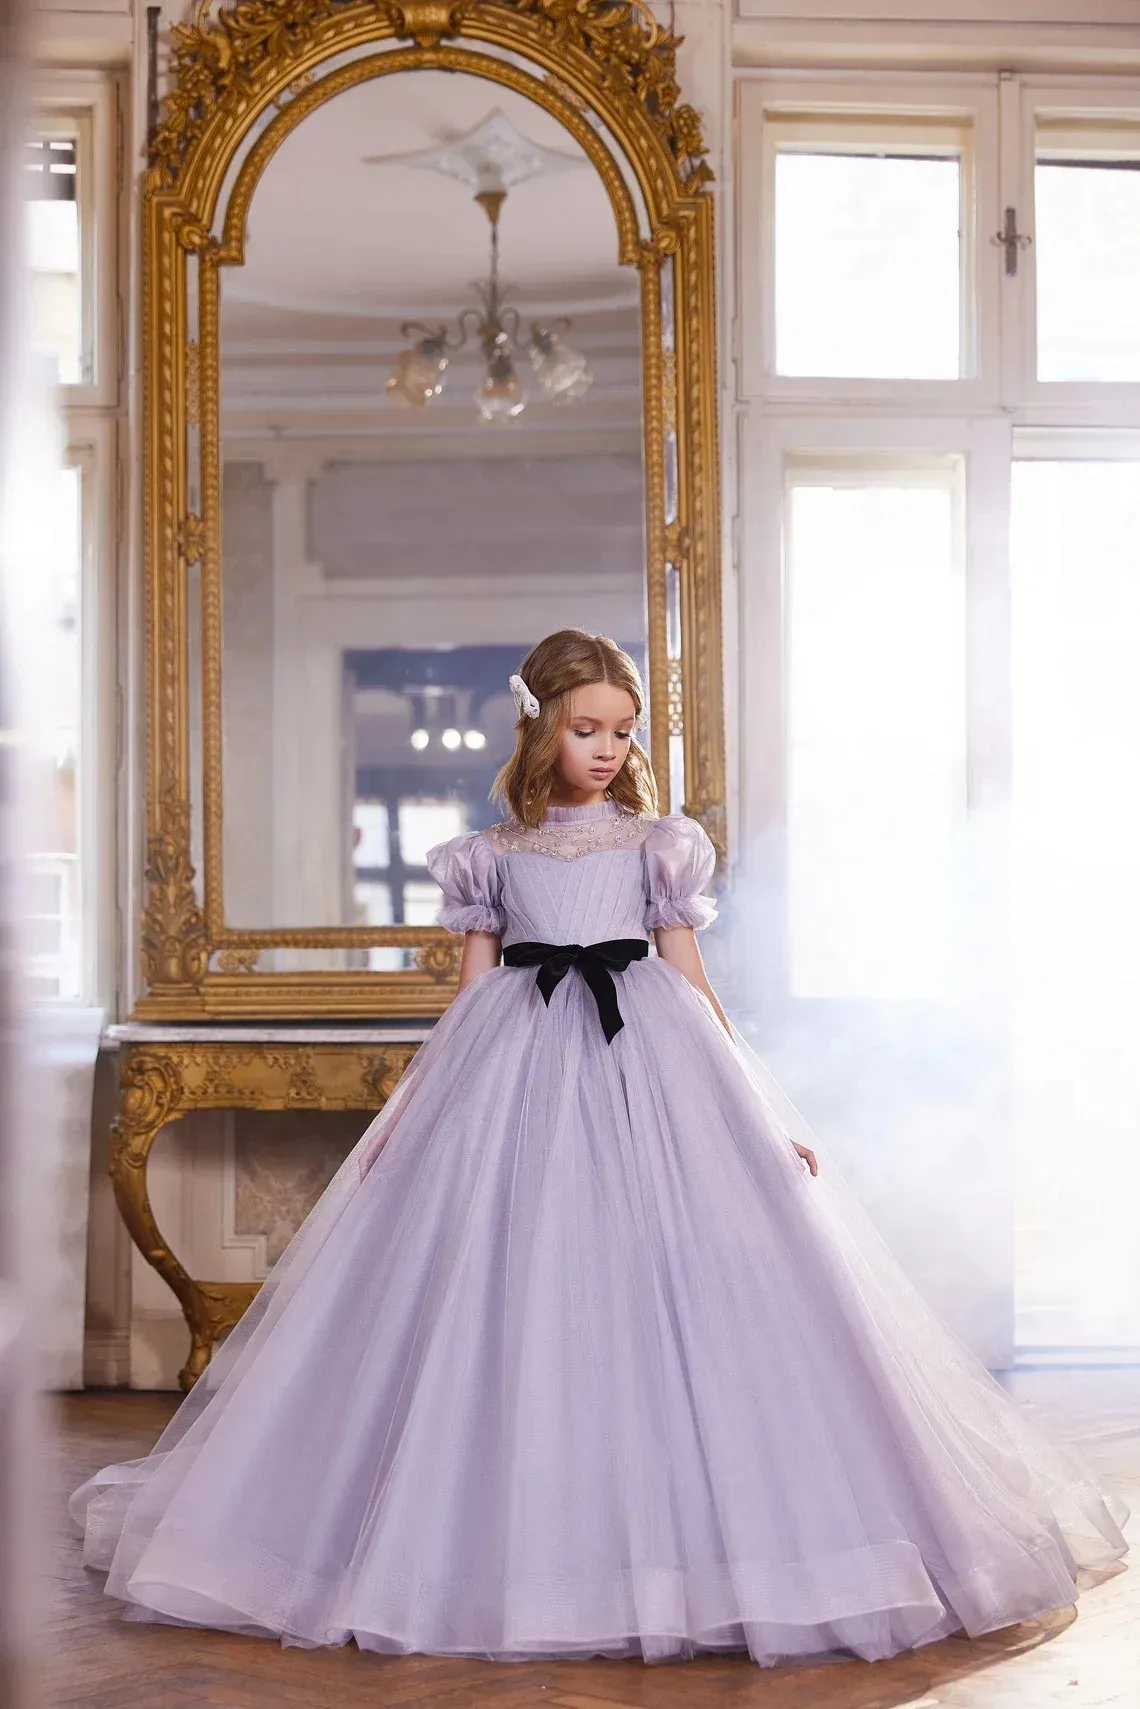 Classy Long Purple Flower Girl Dresses Jewel Neck Tulle Short Sleeves with Bow Ball Gown Floor Length Custom Made for Wedding Party